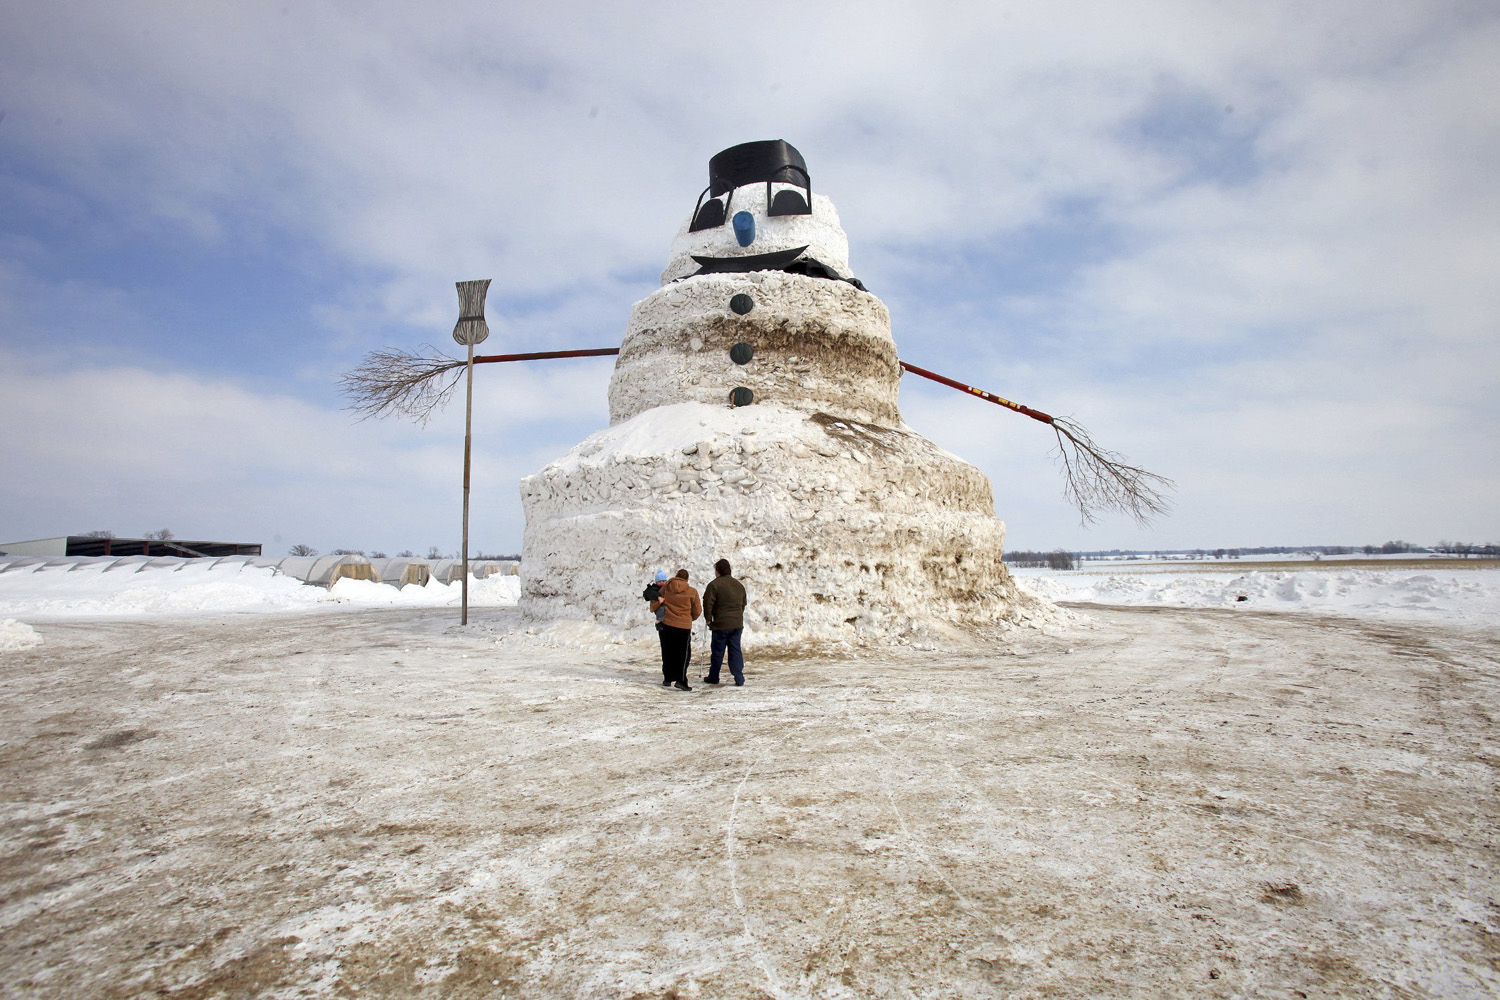 A couple and a child look at a 50-foot snowman named "Granddaddy" in Gilman, Minnesota